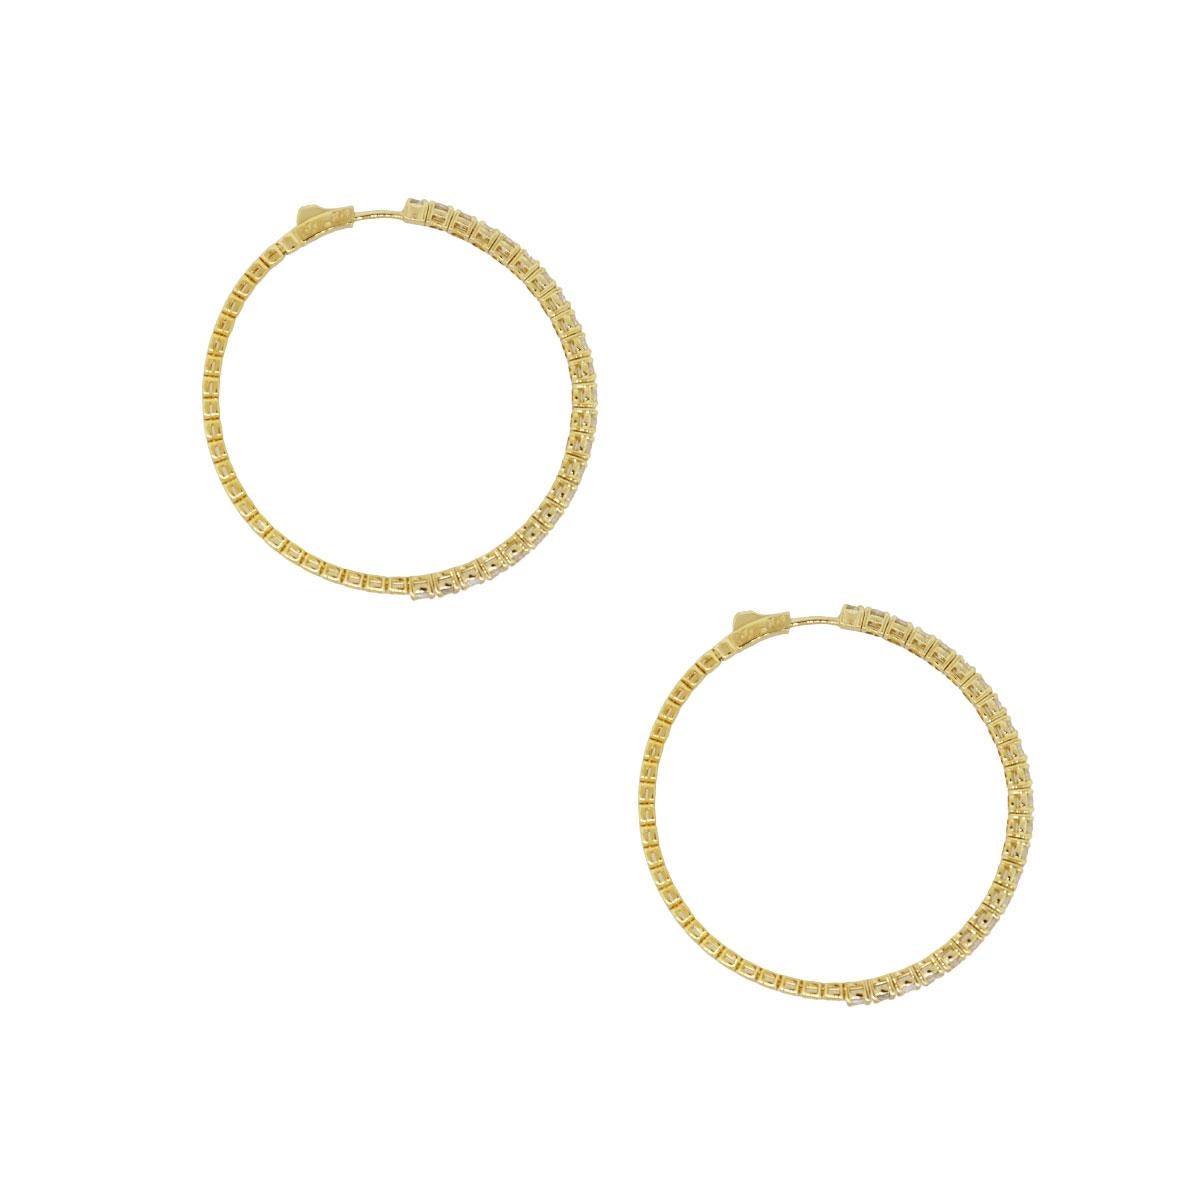 Material: 14k yellow gold
Diamond Details: Approximately 4.56ctw of round brilliant diamonds. Diamonds are G/H in color and VS in clarity.
Measurements: 2″ x 0.12 x 2″
Earrings Backs: Hoop
Total Weight: 14.5g (9.3dwt)
Additional Details: This item